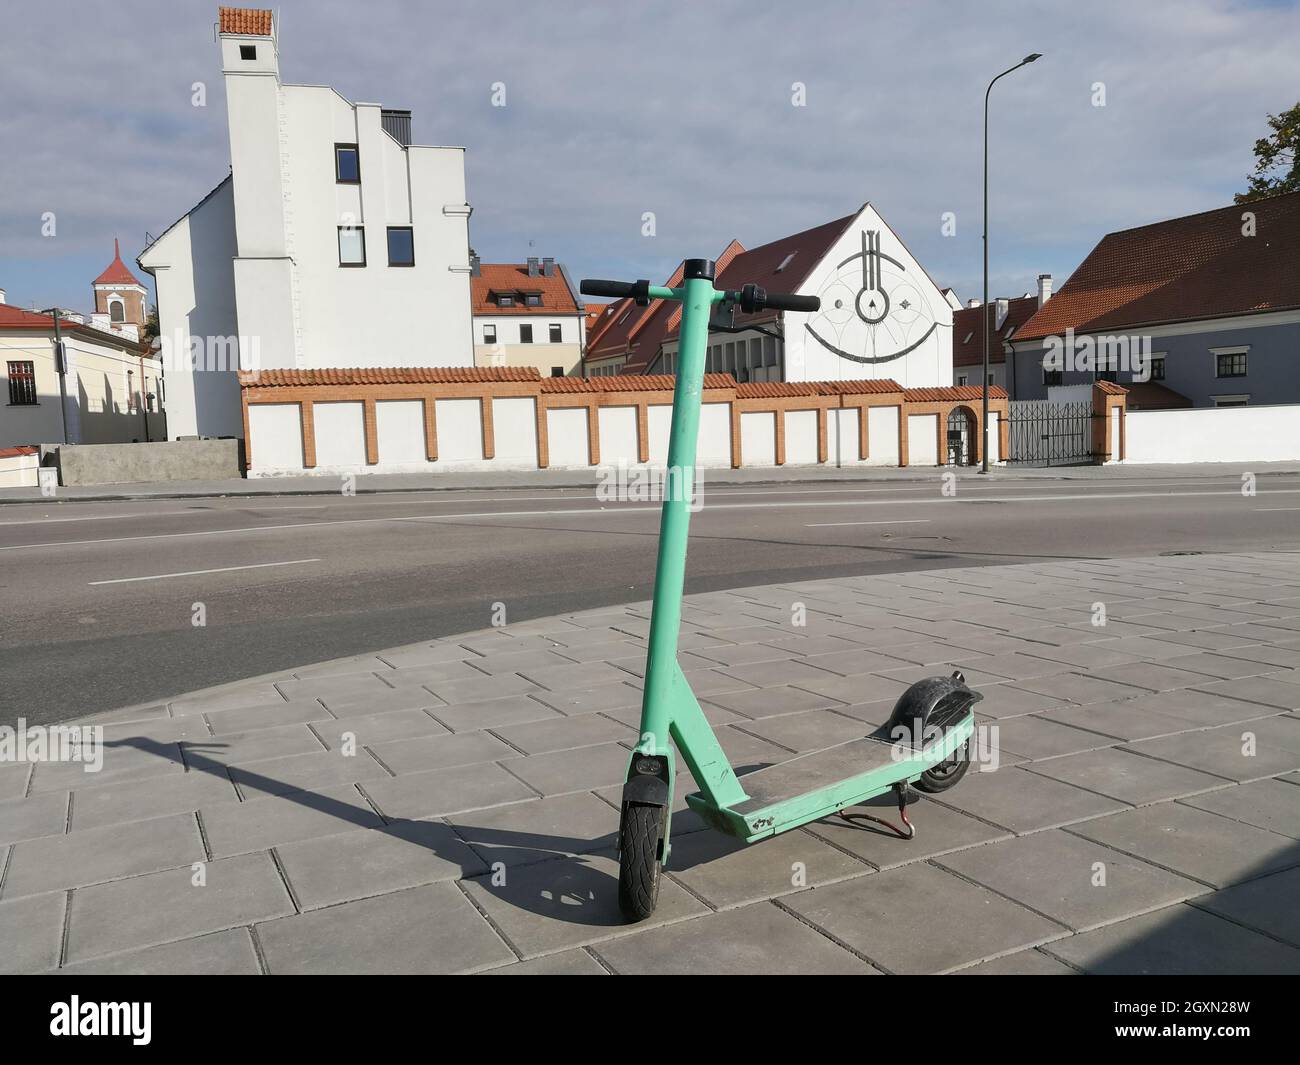 Environment friendly scooter for public rent parked at the street of Kaunas, Lithuania Stock Photo